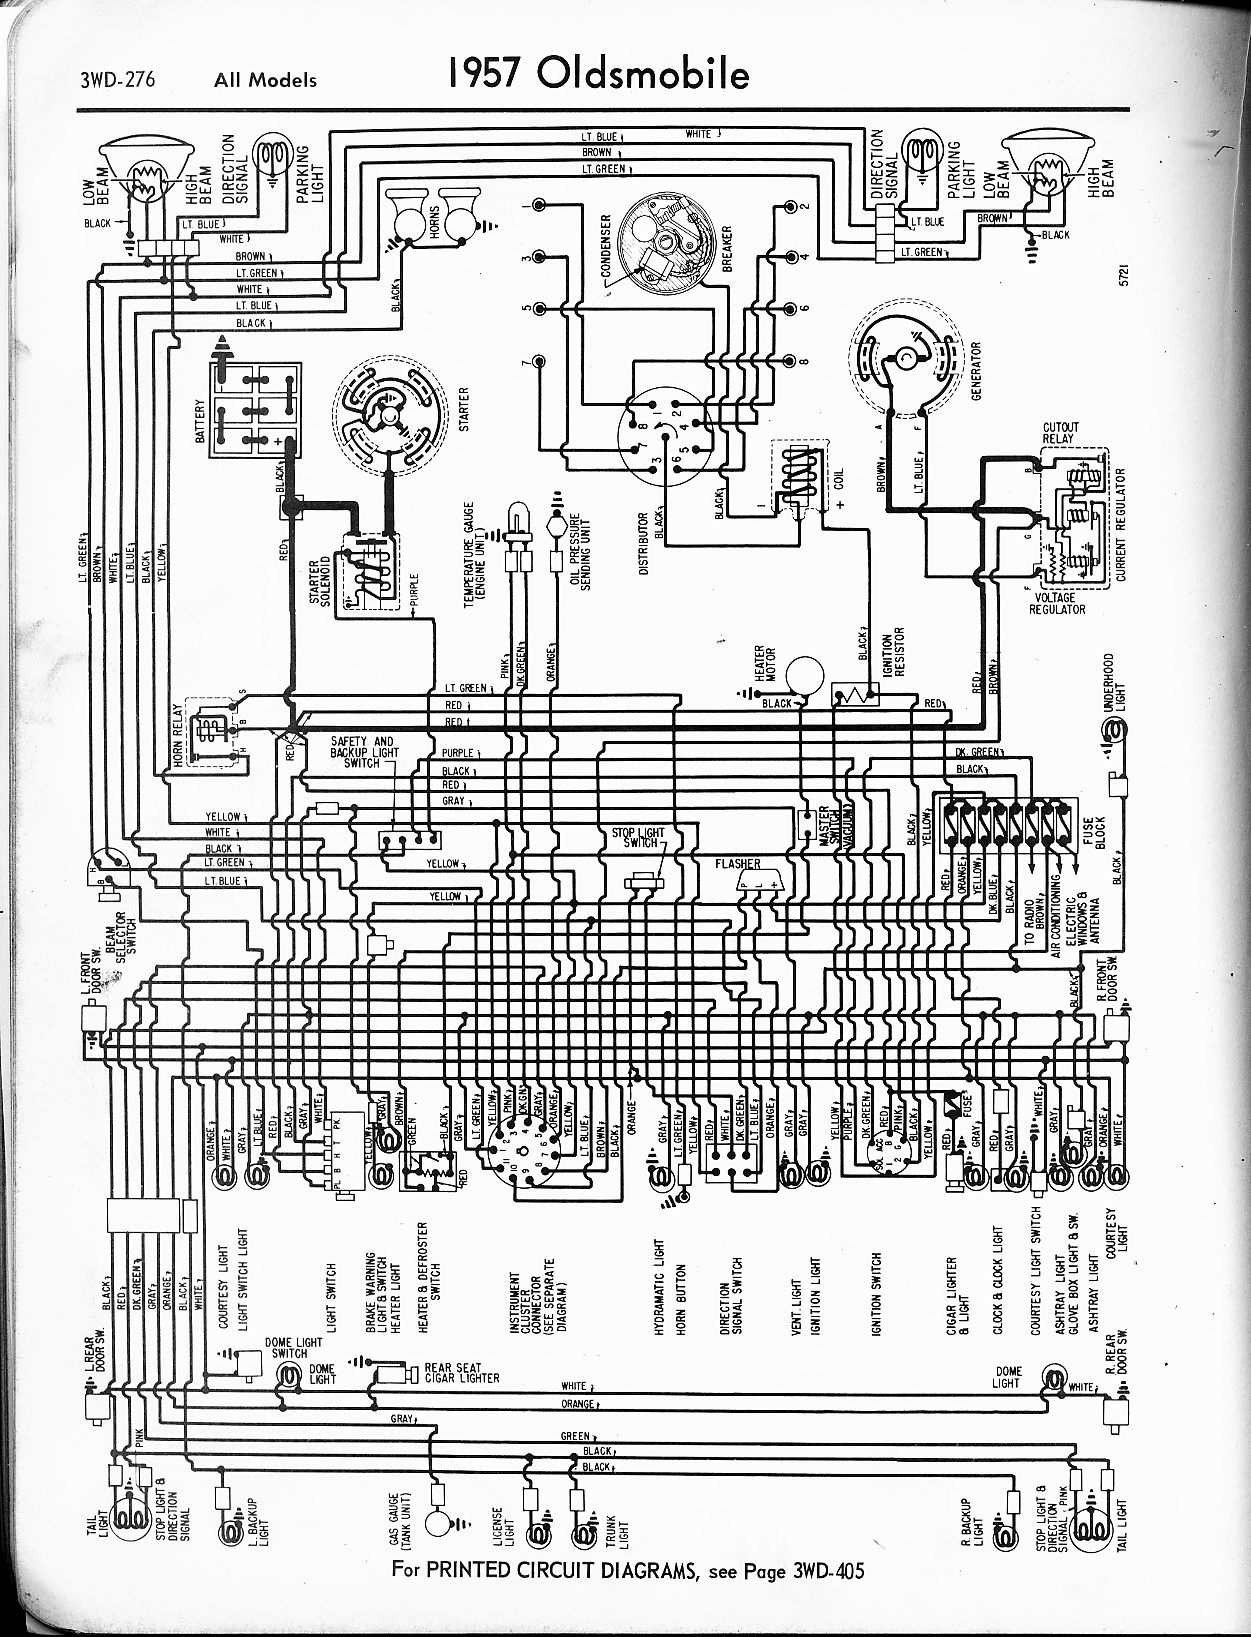 Oldsmobile wiring diagrams - The Old Car Manual Project